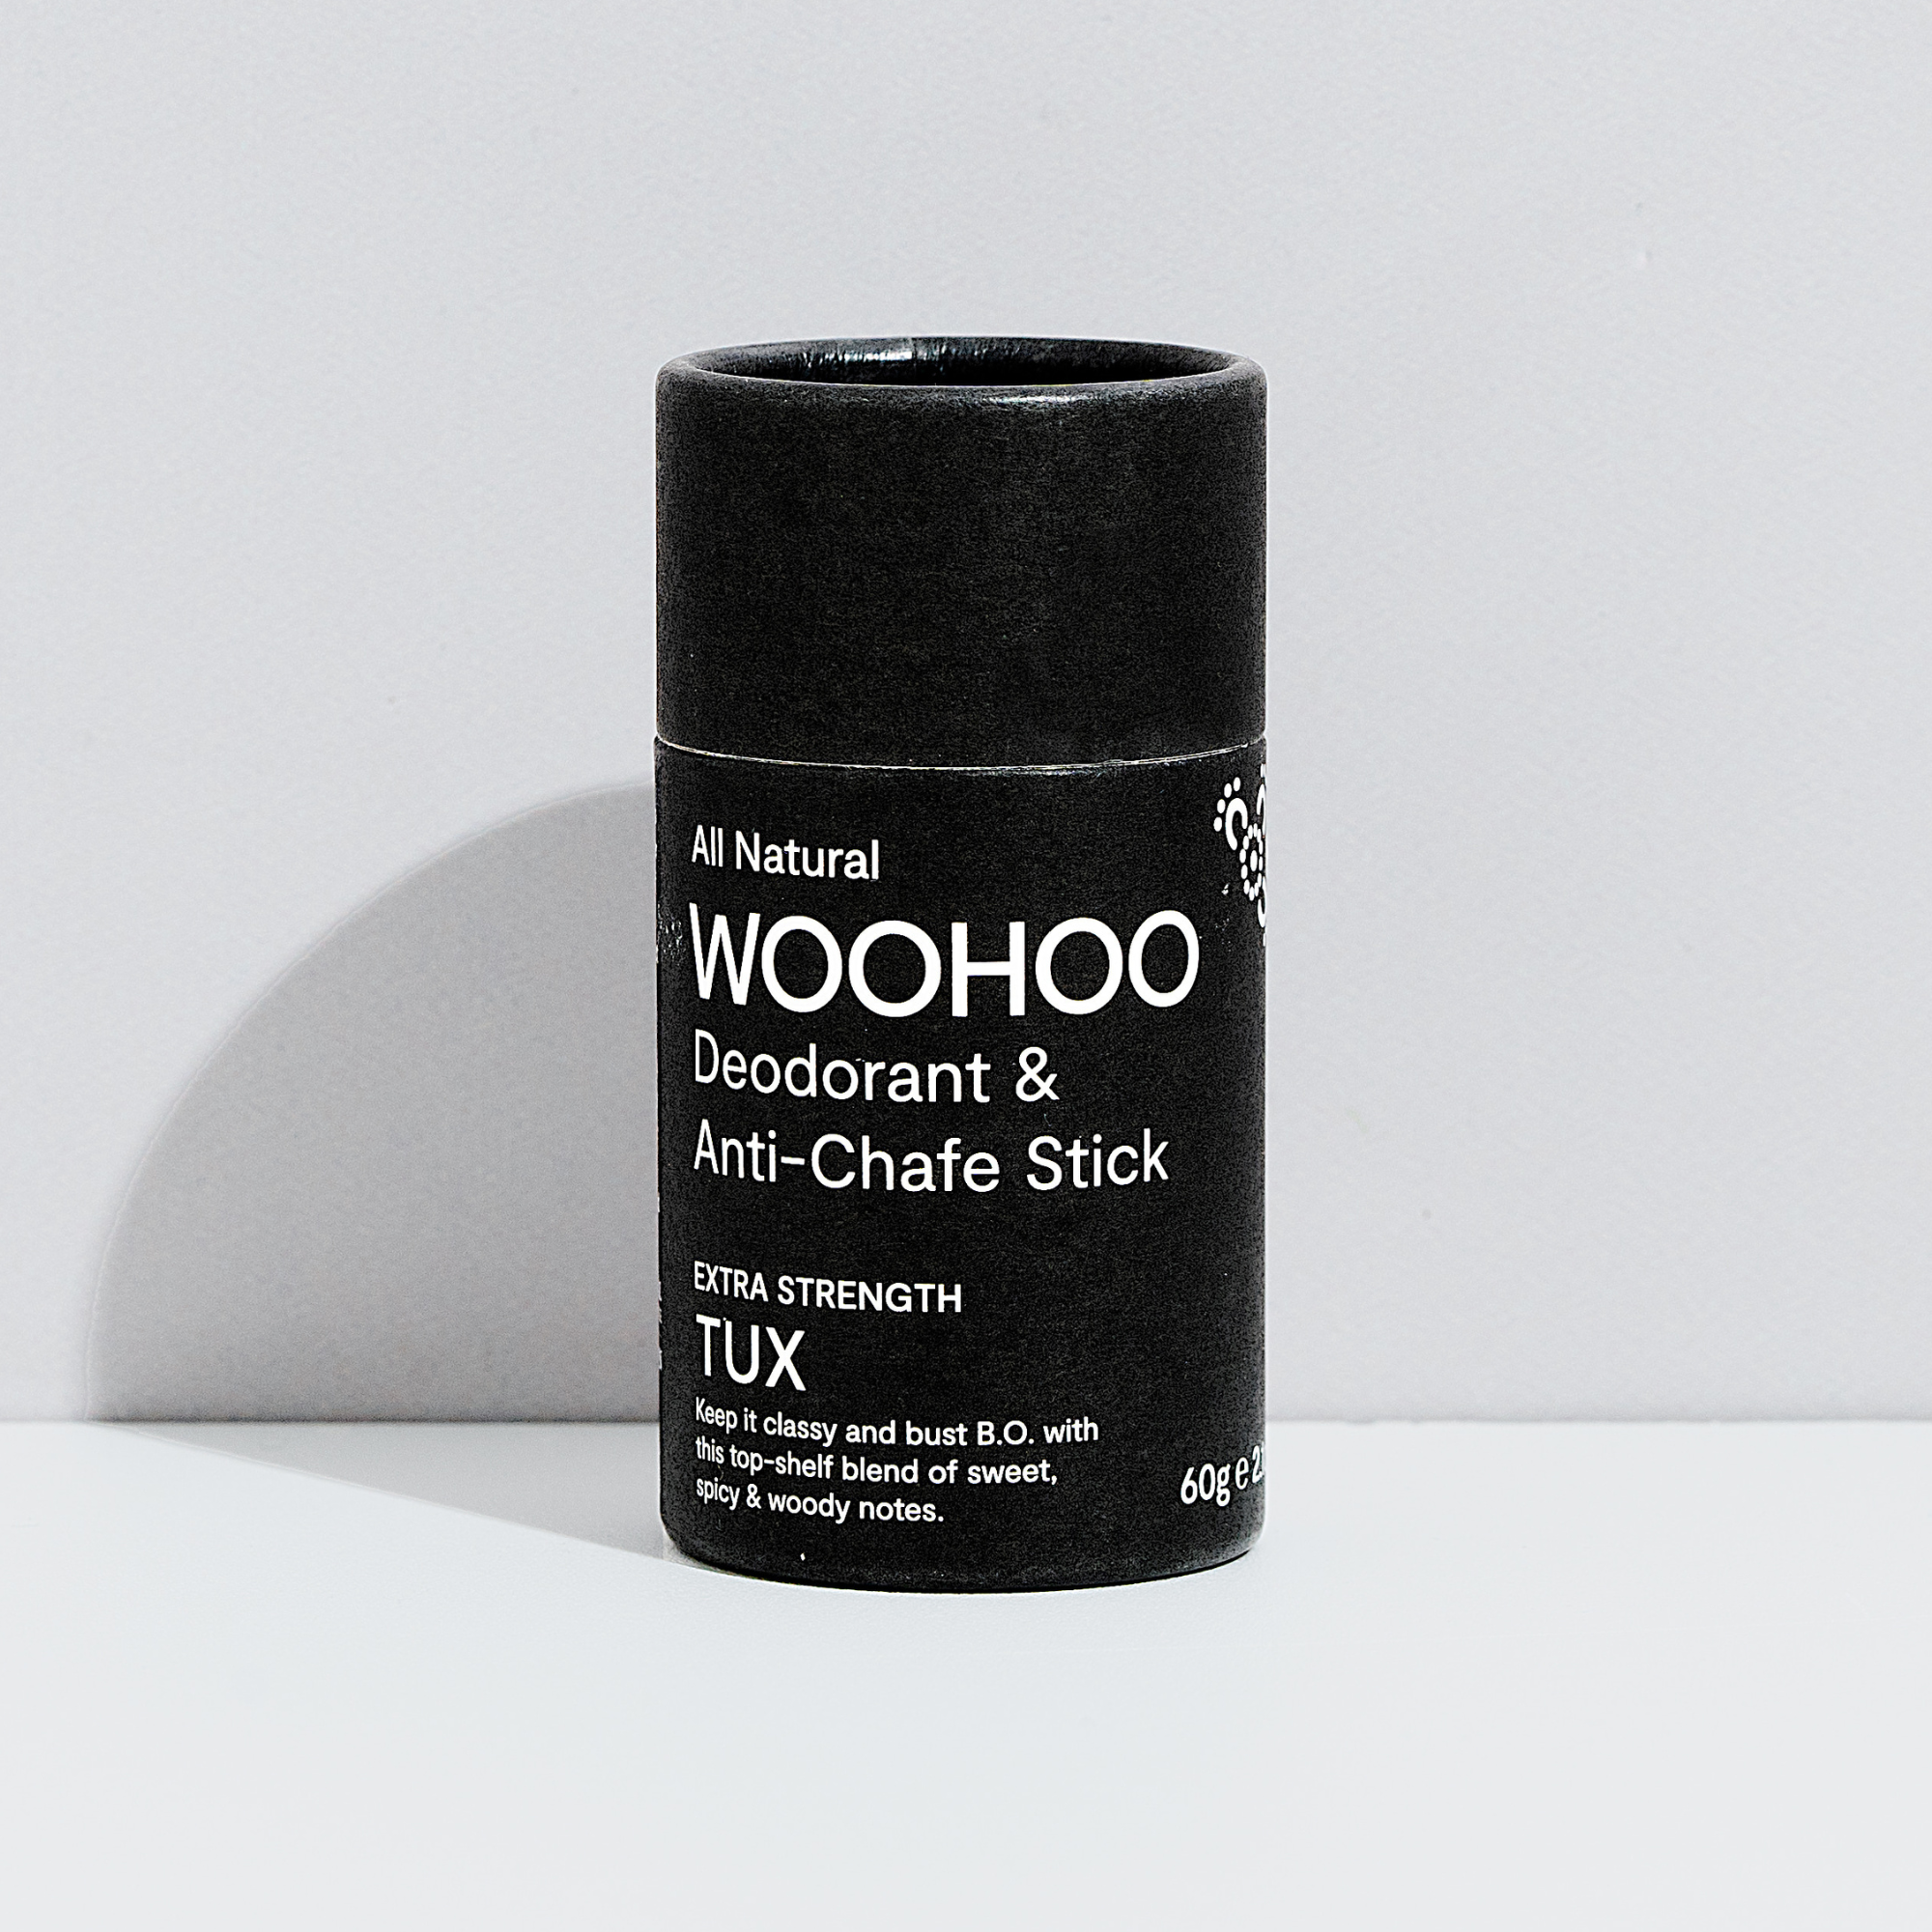 woohoo body deodorant and anti-chafe stick tux extra strength 60 grams front of tube packaging tube with grey background